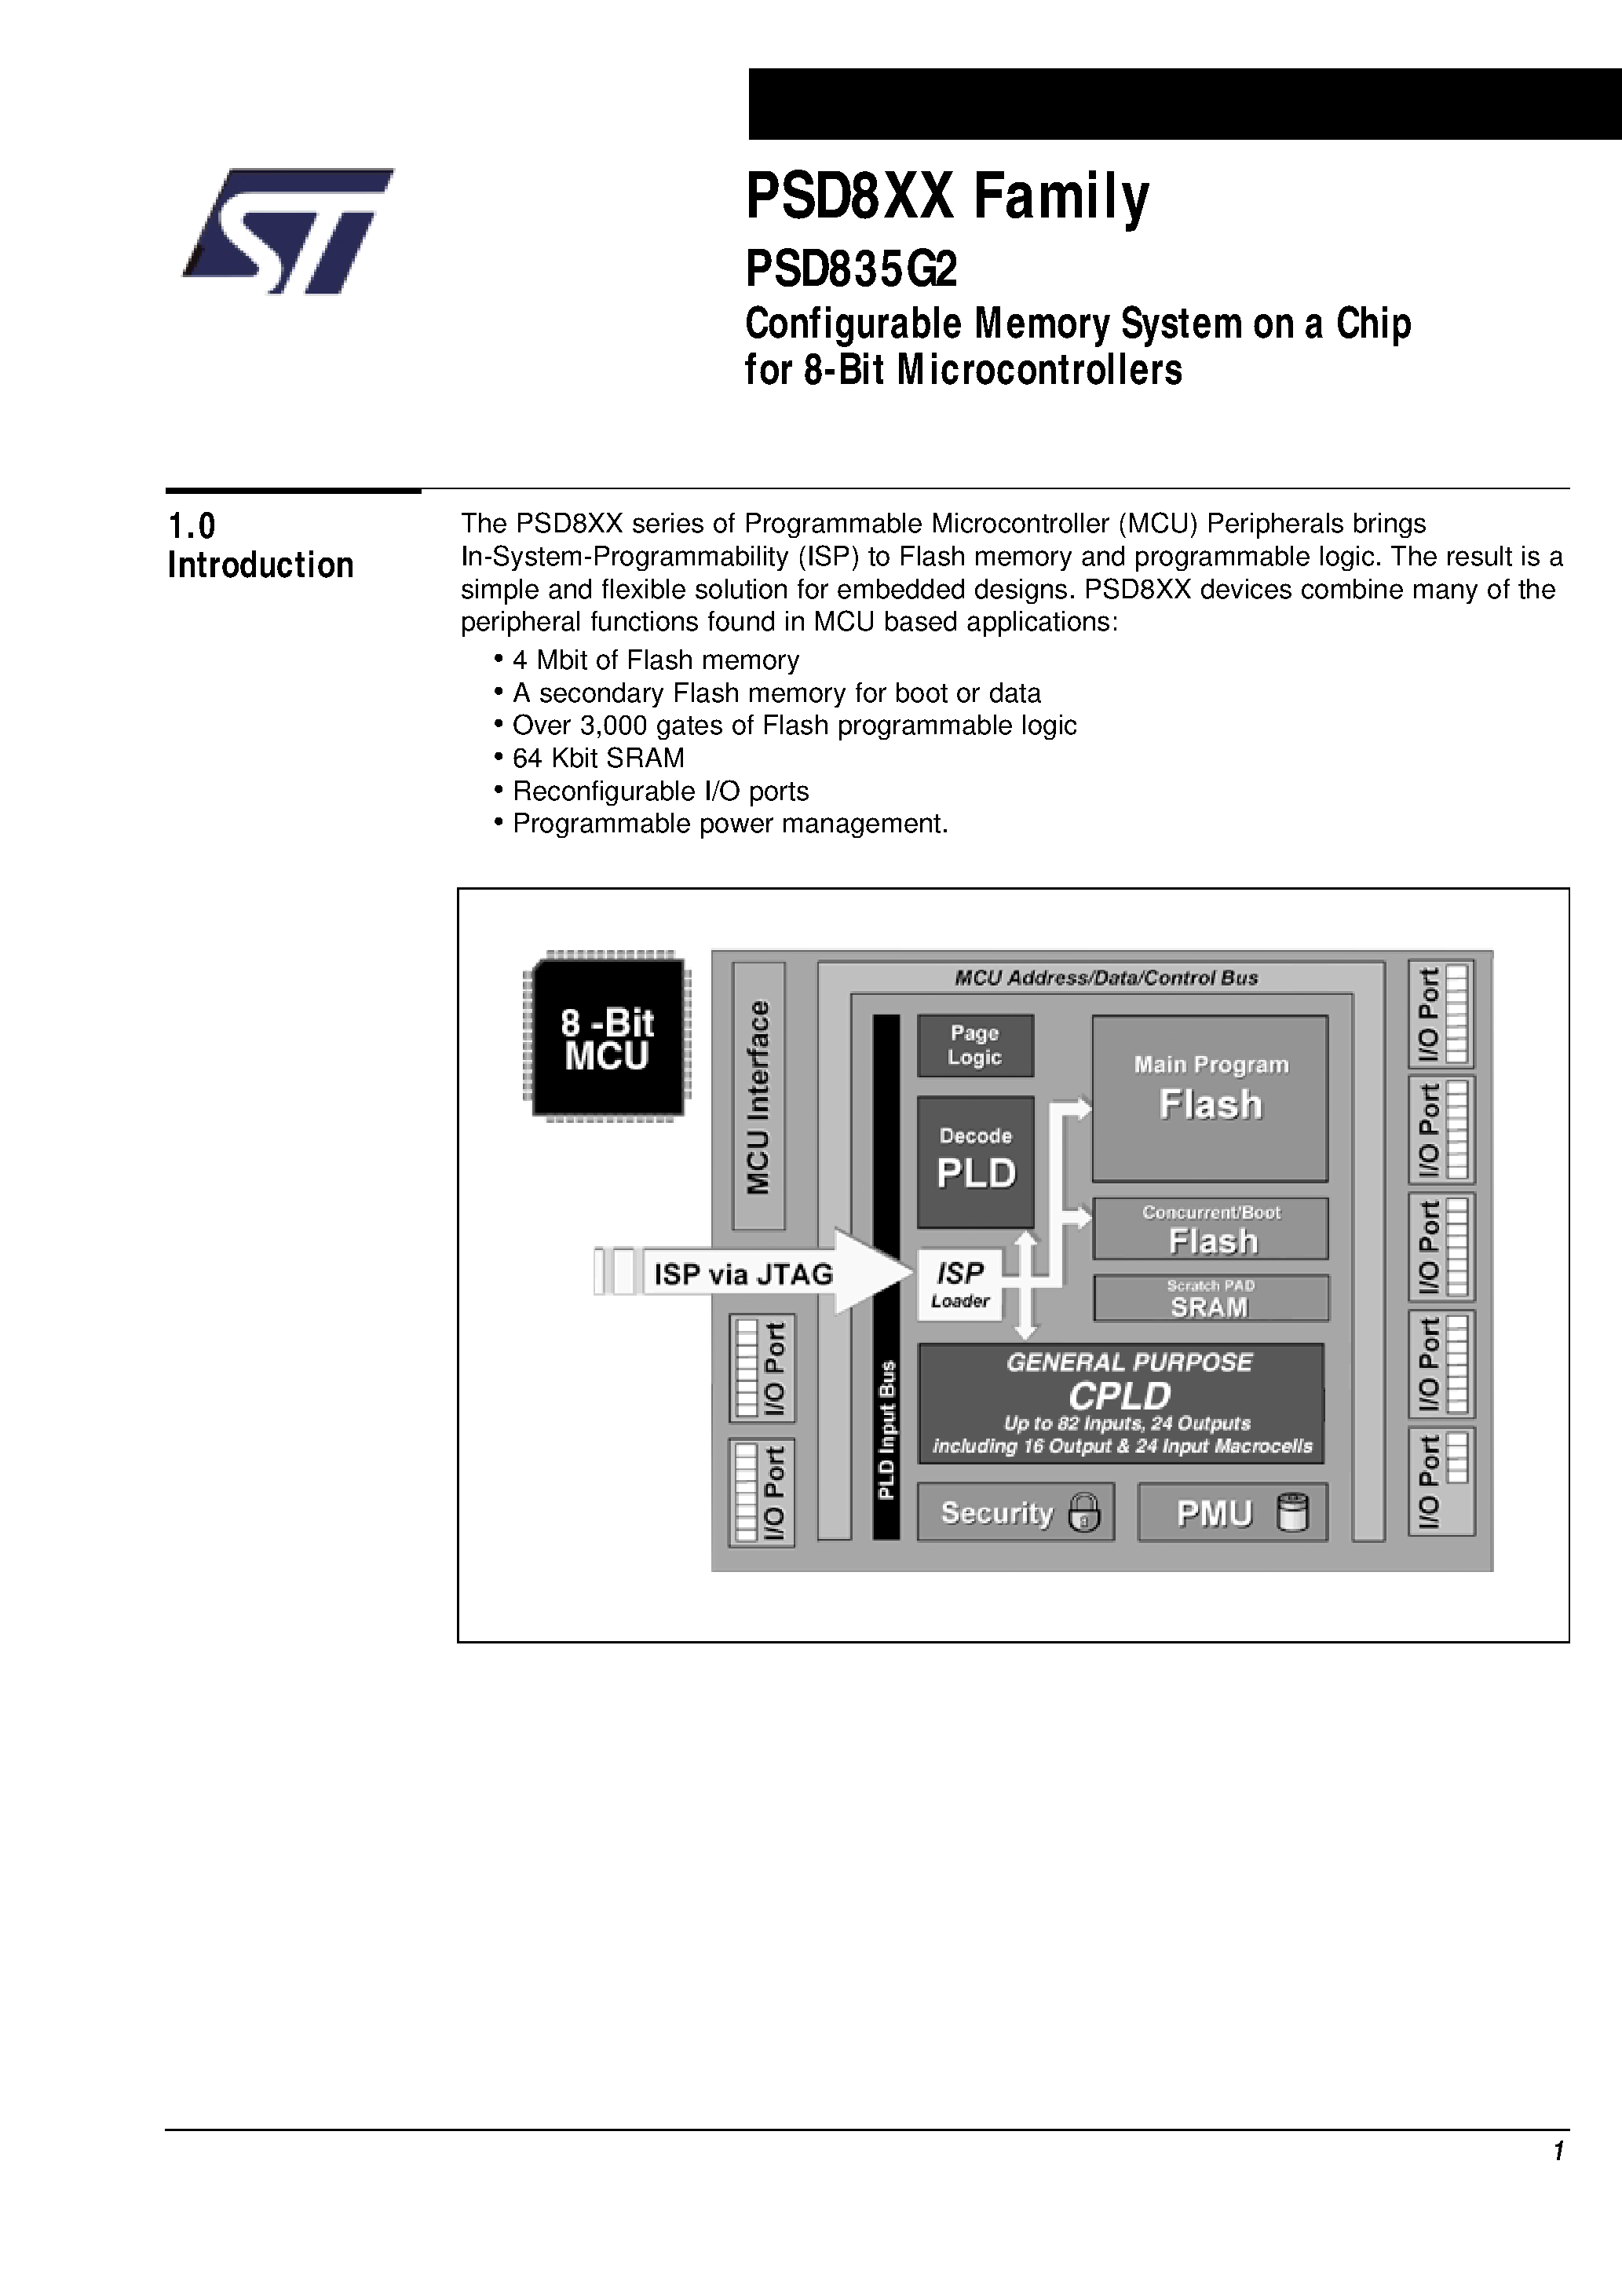 Datasheet PSD835F1-A-90JI - Configurable Memory System on a Chip for 8-Bit Microcontrollers page 2